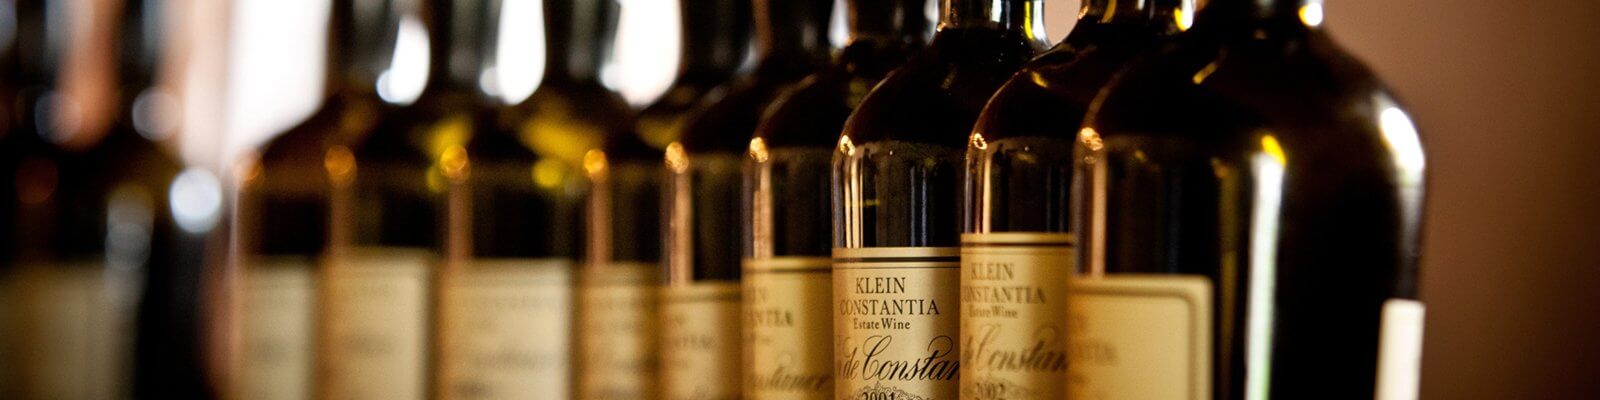 Our collection of Klein Constantia - Find this at Onshore Cellars your yacht wine supplier